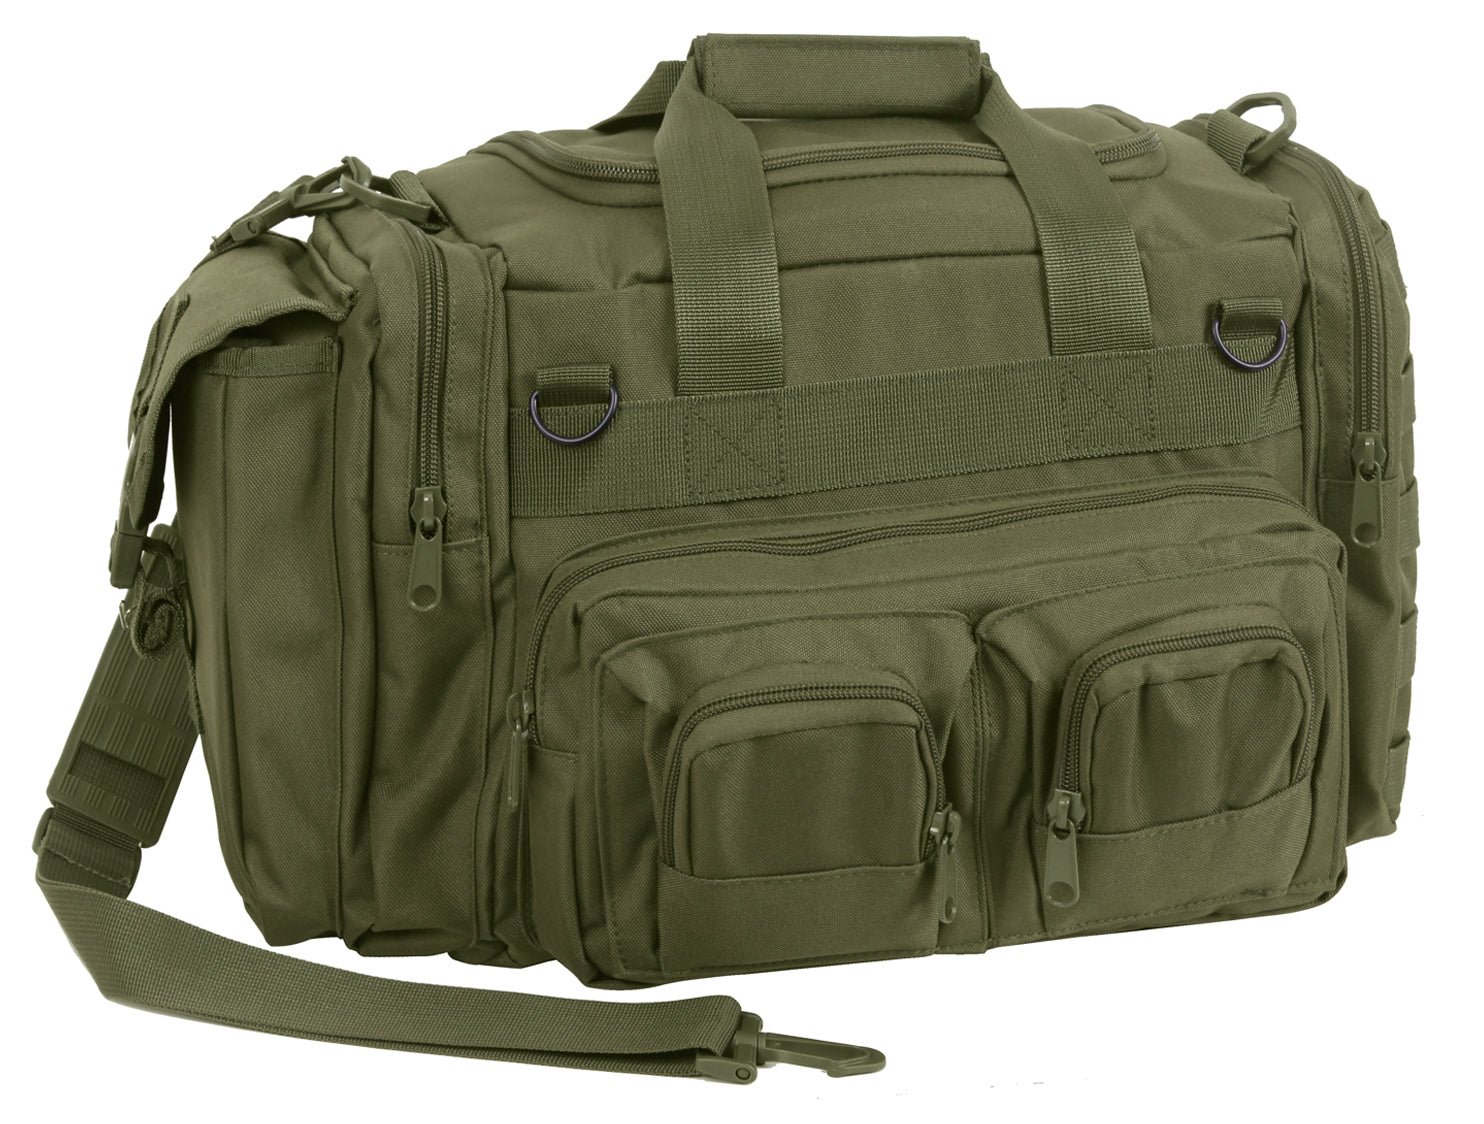 Milspec Concealed Carry Bag Concealed Carry Bags MilTac Tactical Military Outdoor Gear Australia